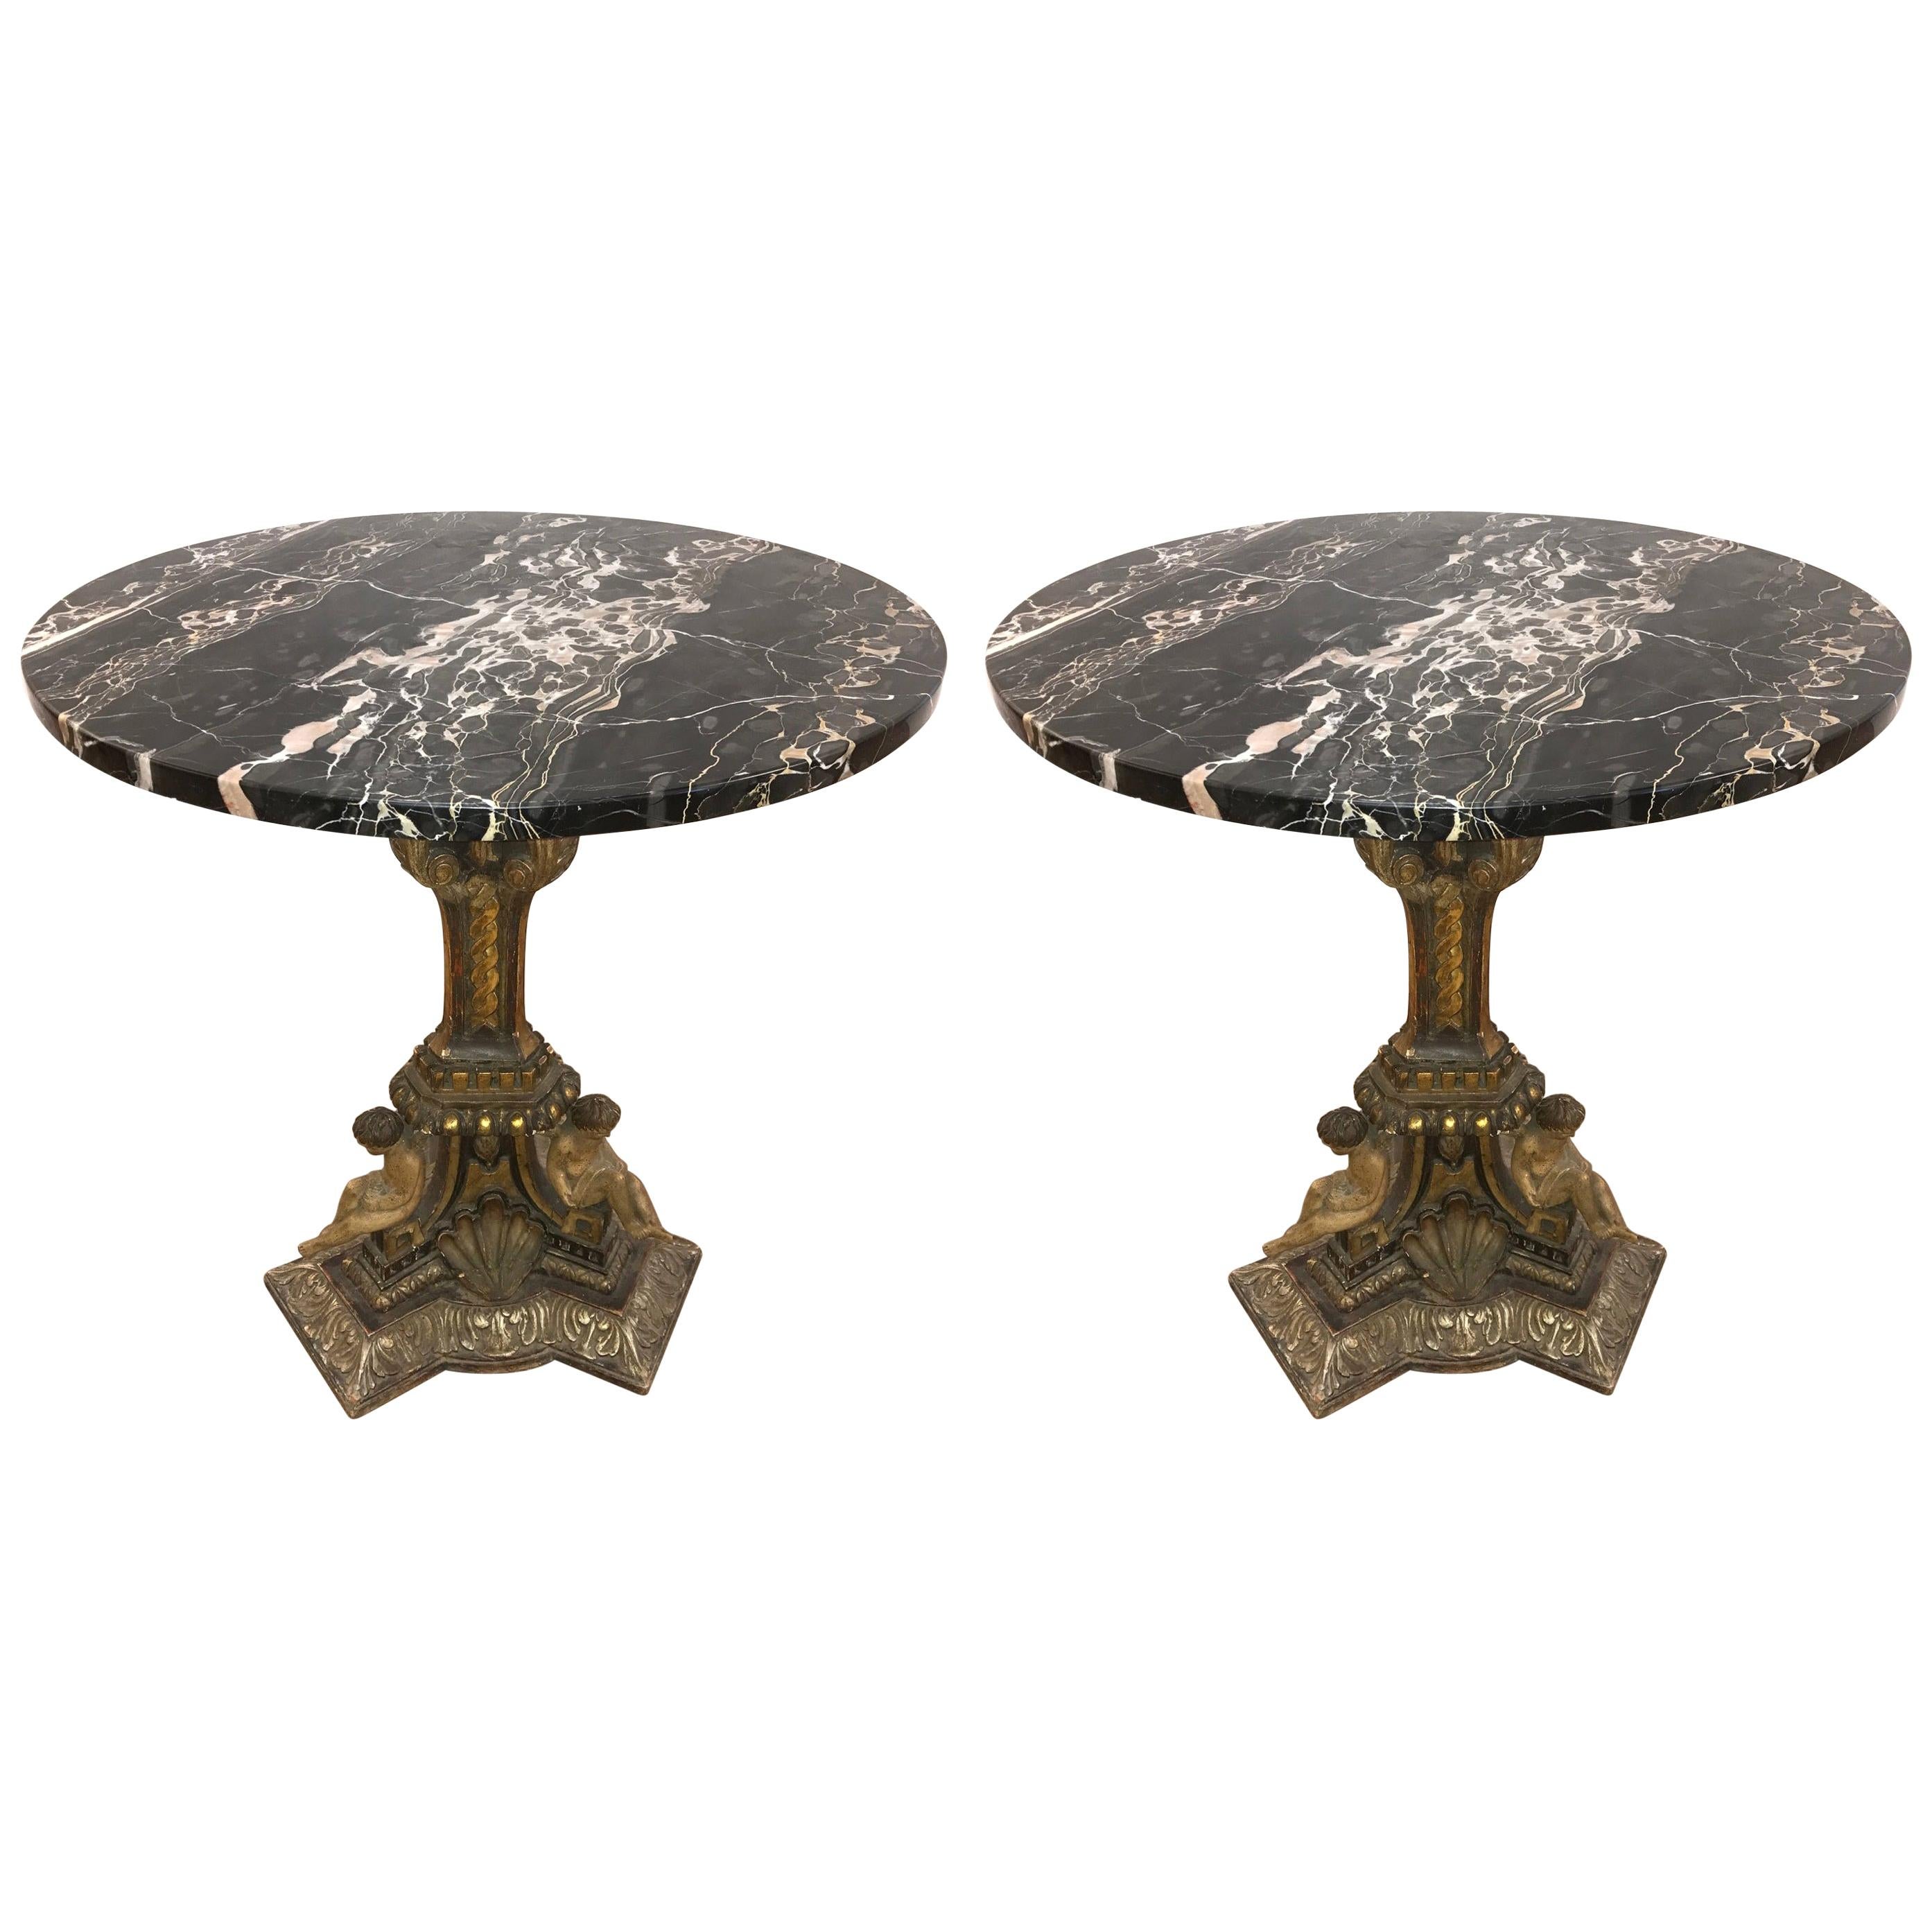 Pair of 19th Century Italian Giltwood Marble-Top Pedestal Tables